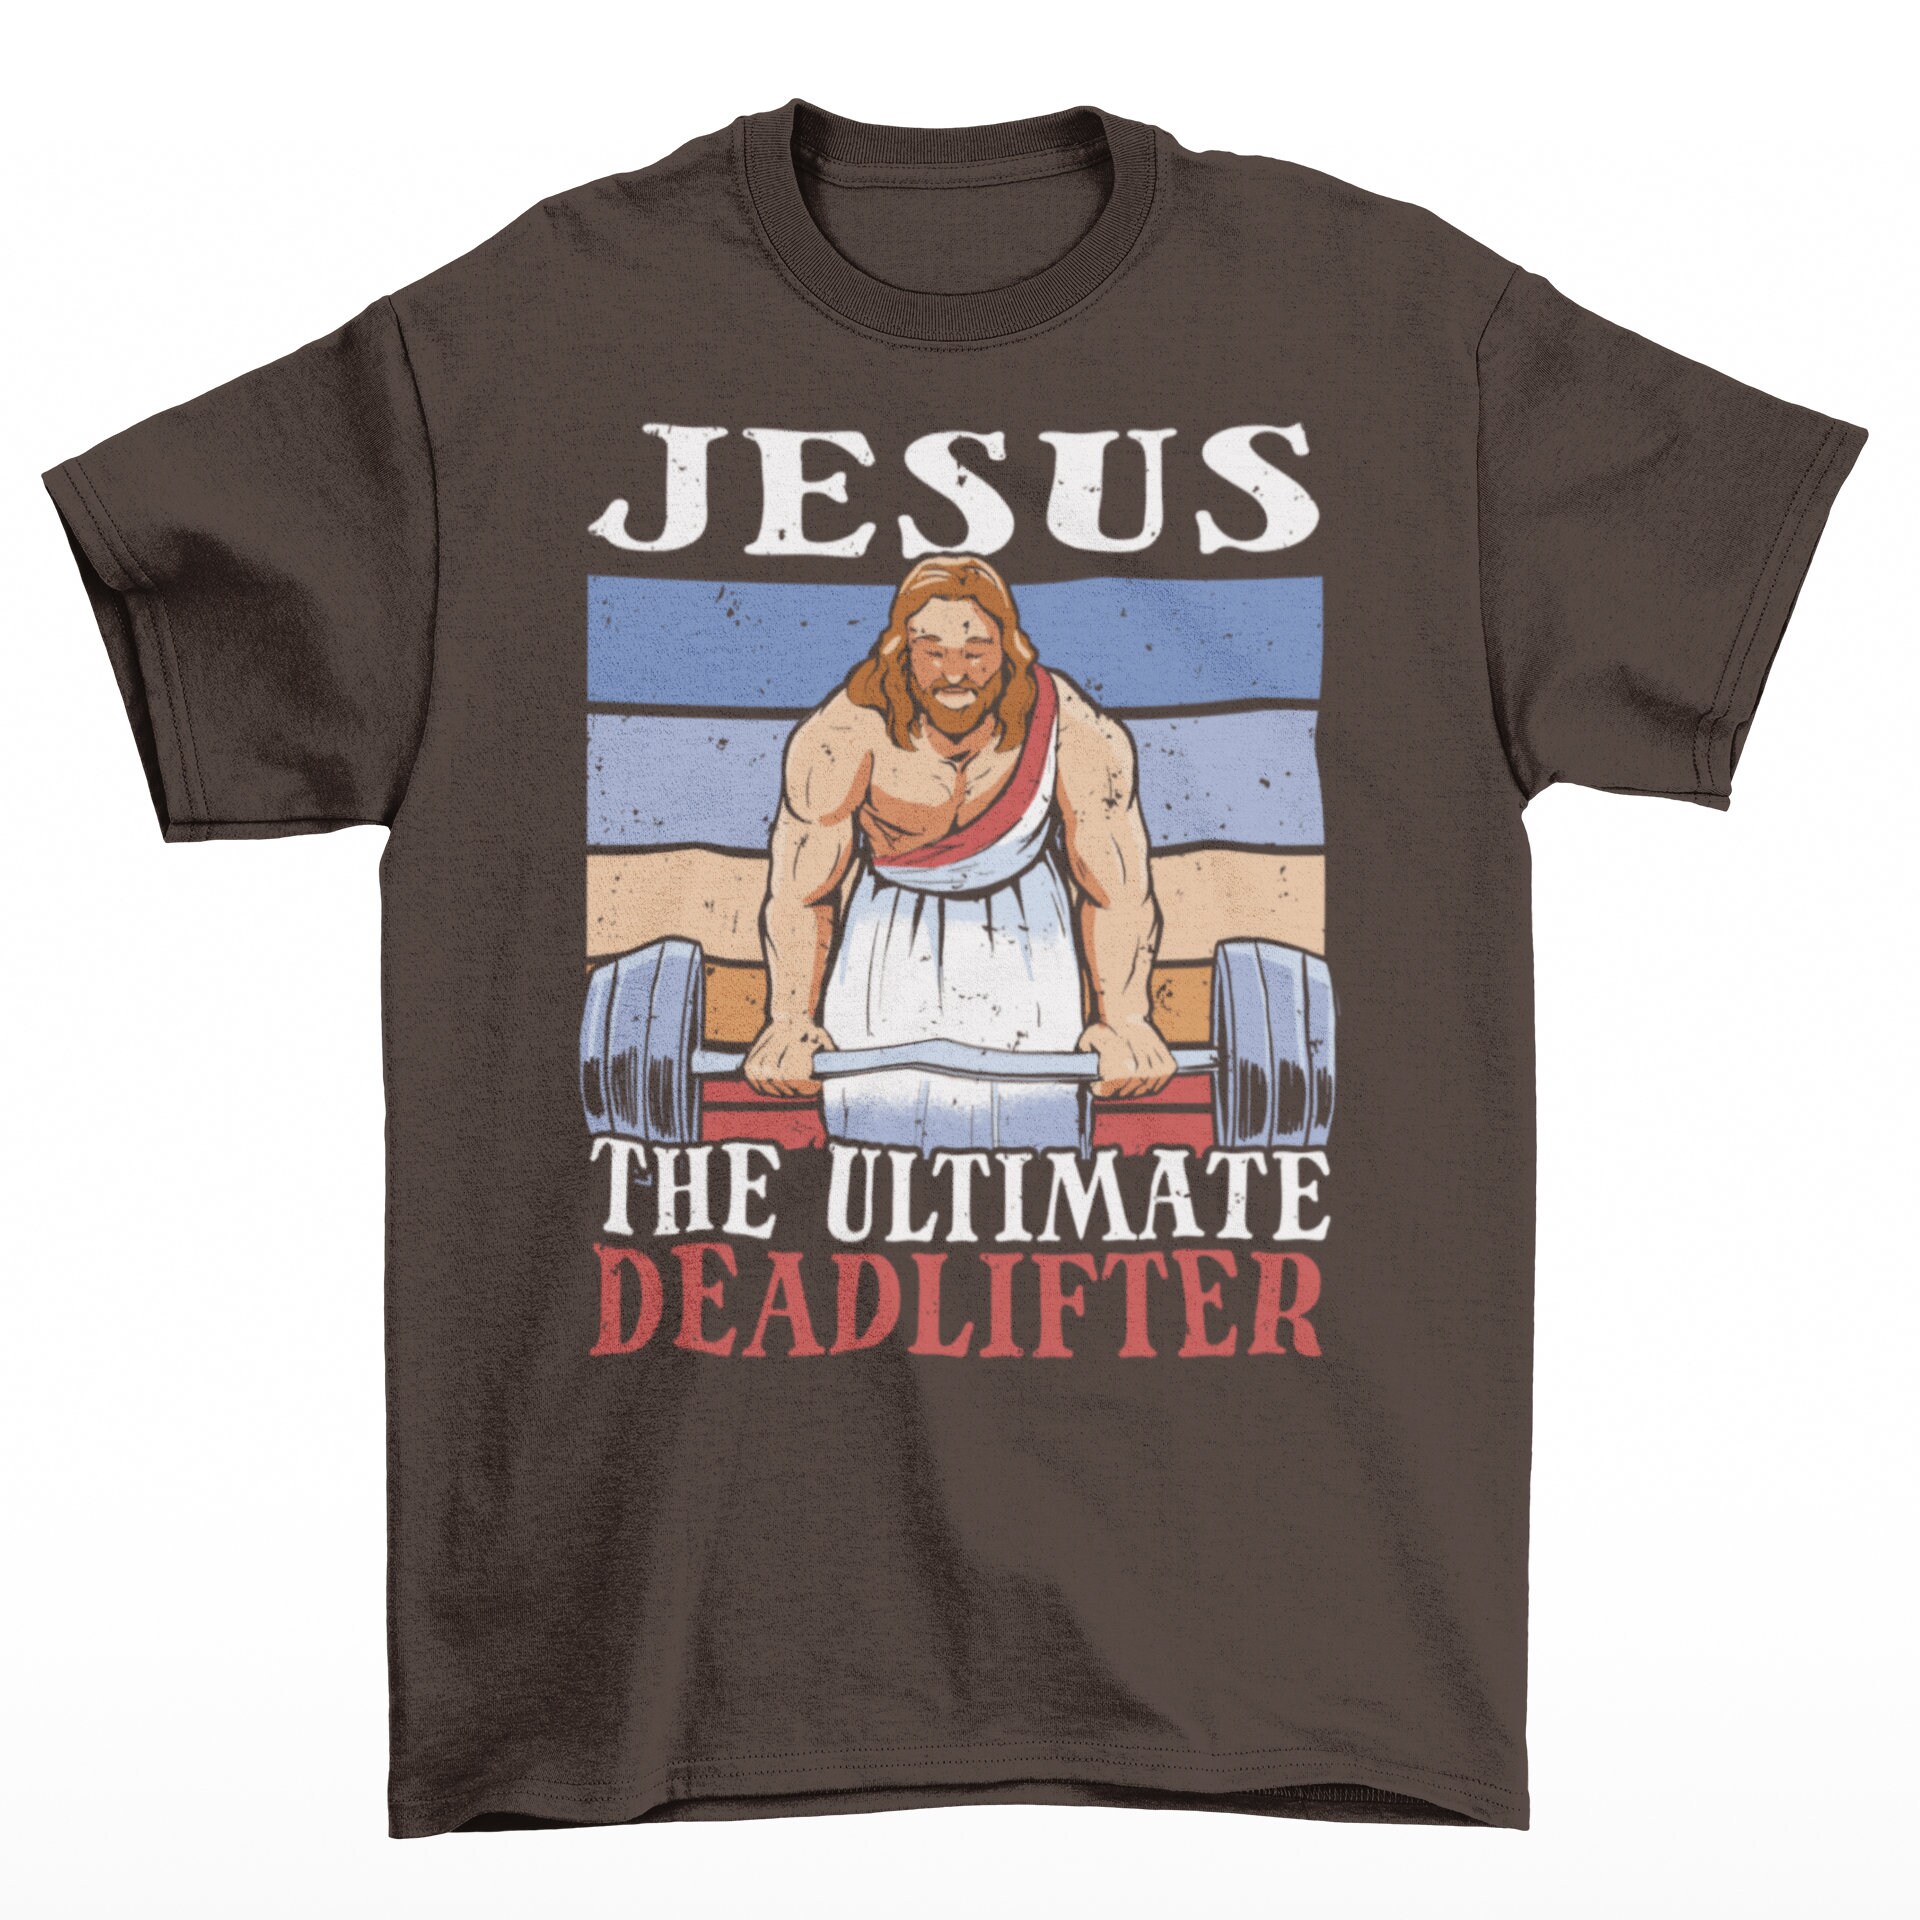 Jesus The Ultimate Deadlifter Gym Working Out Fitness T Shirt Vintage Retro  Cool Gift Mens Womens Unisex Cartoon Anime Top Tee B605